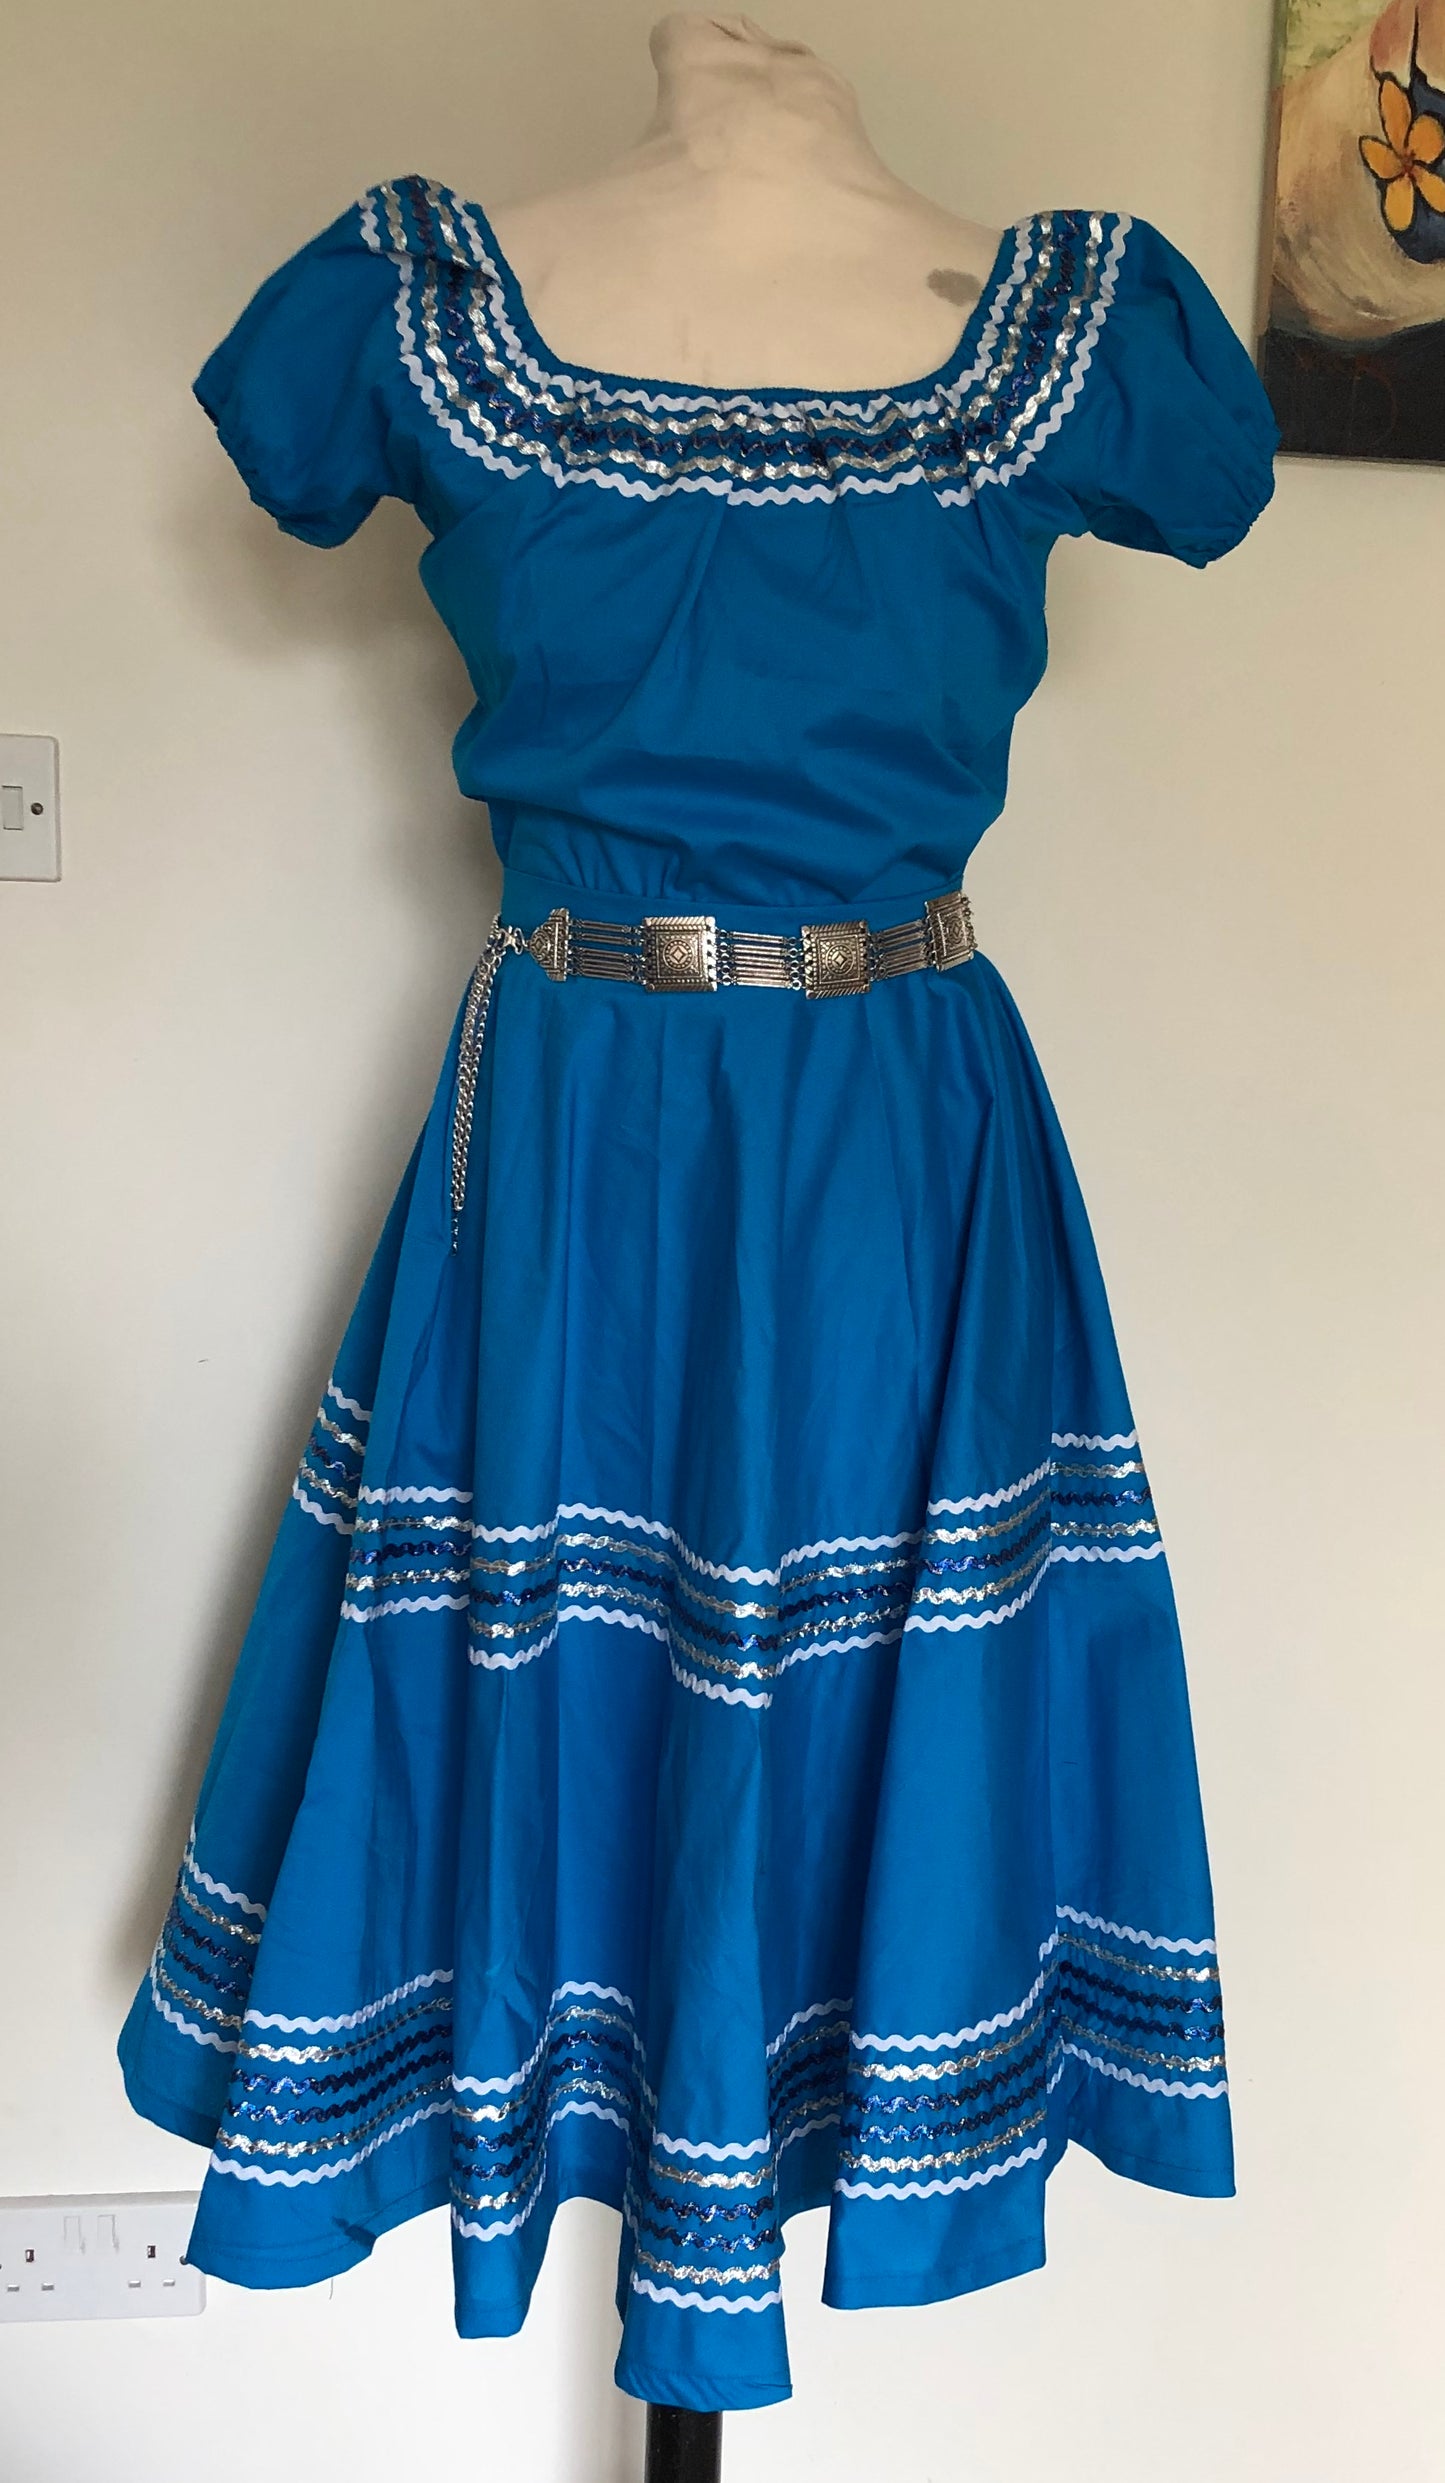 Blue Vintage 1950s style full circle Patio skirt XL